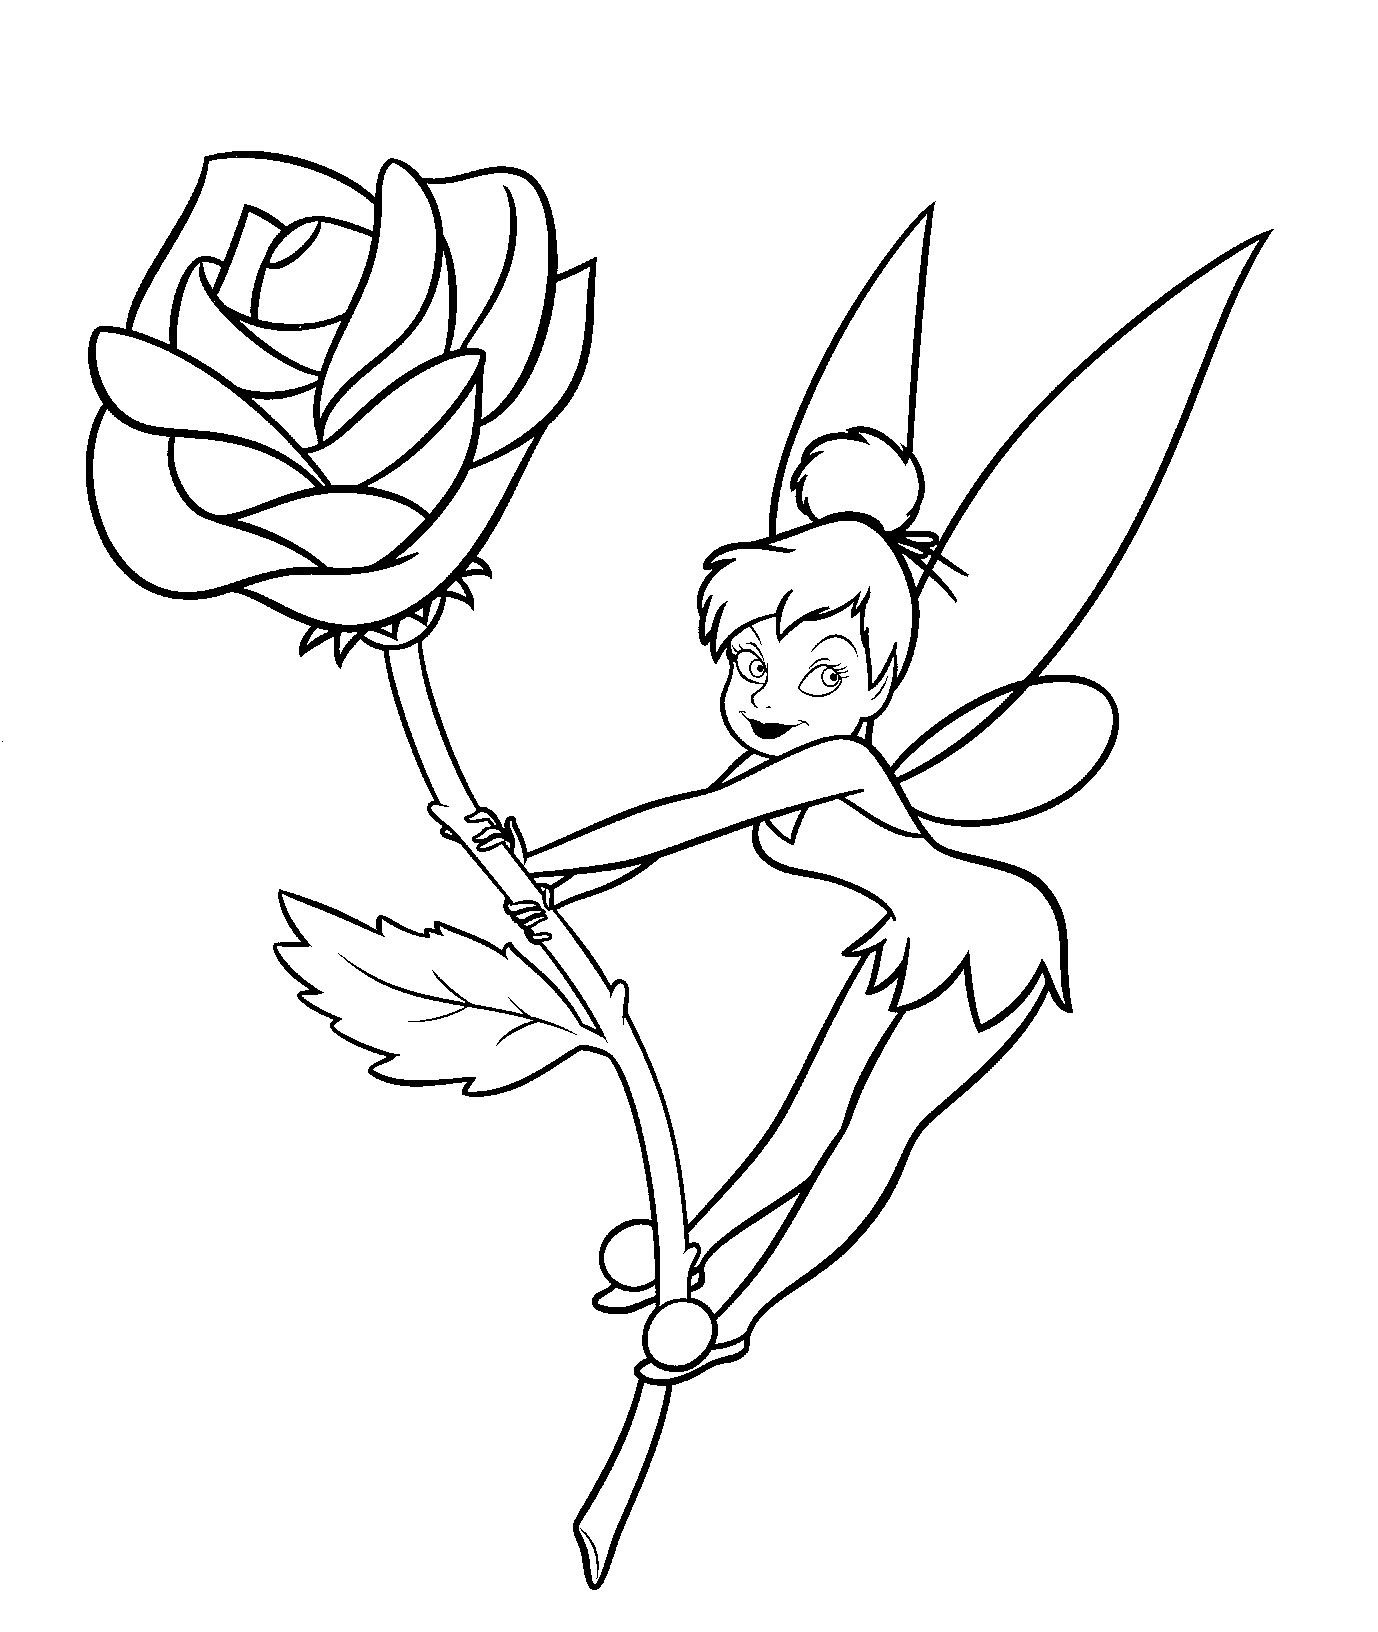 Easy Tinkerbell Coloring Pages at Free printable